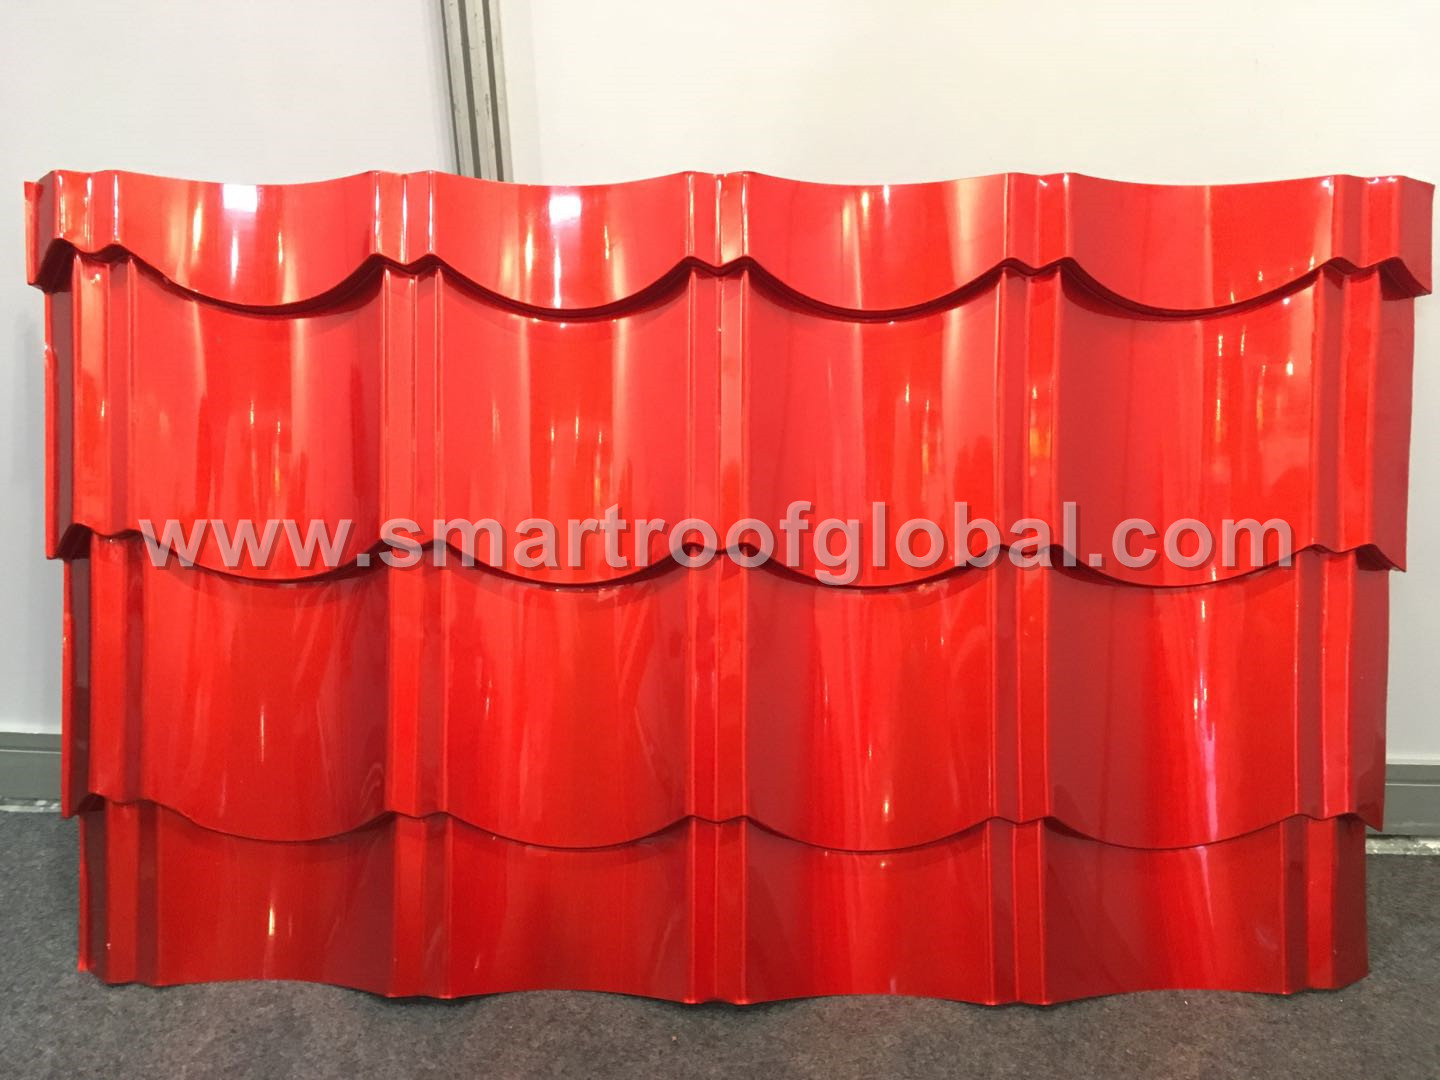 China wholesale Roof Building Material - Nano-tec Roofing – Smartroof